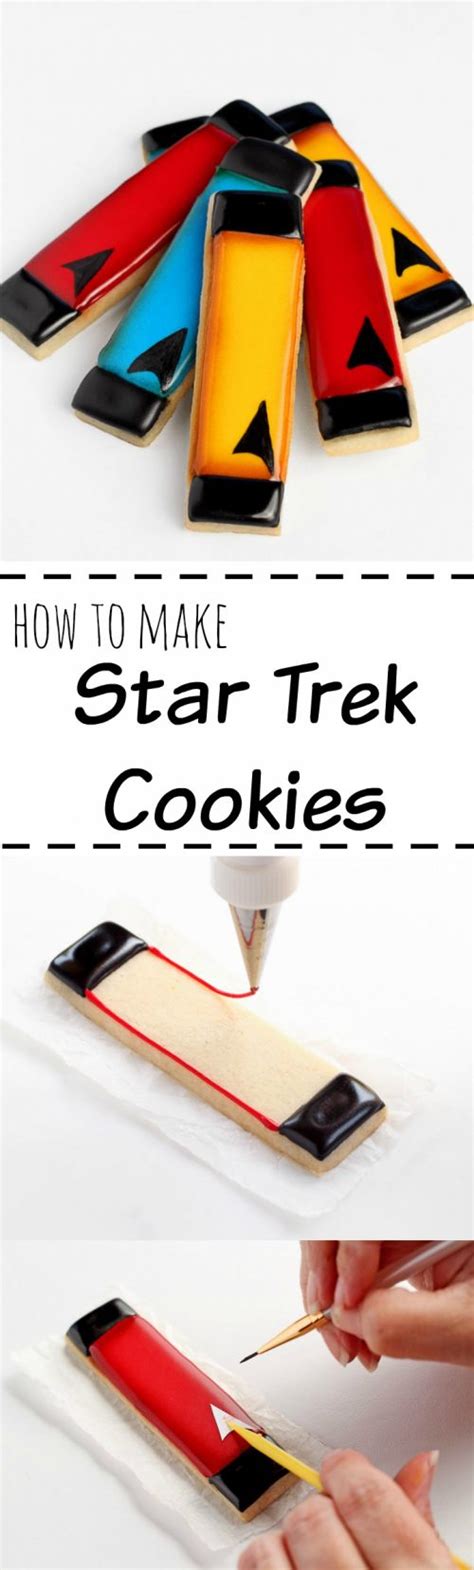 How To Make Simple Star Trek Cookies With Video The Bearfoot Baker